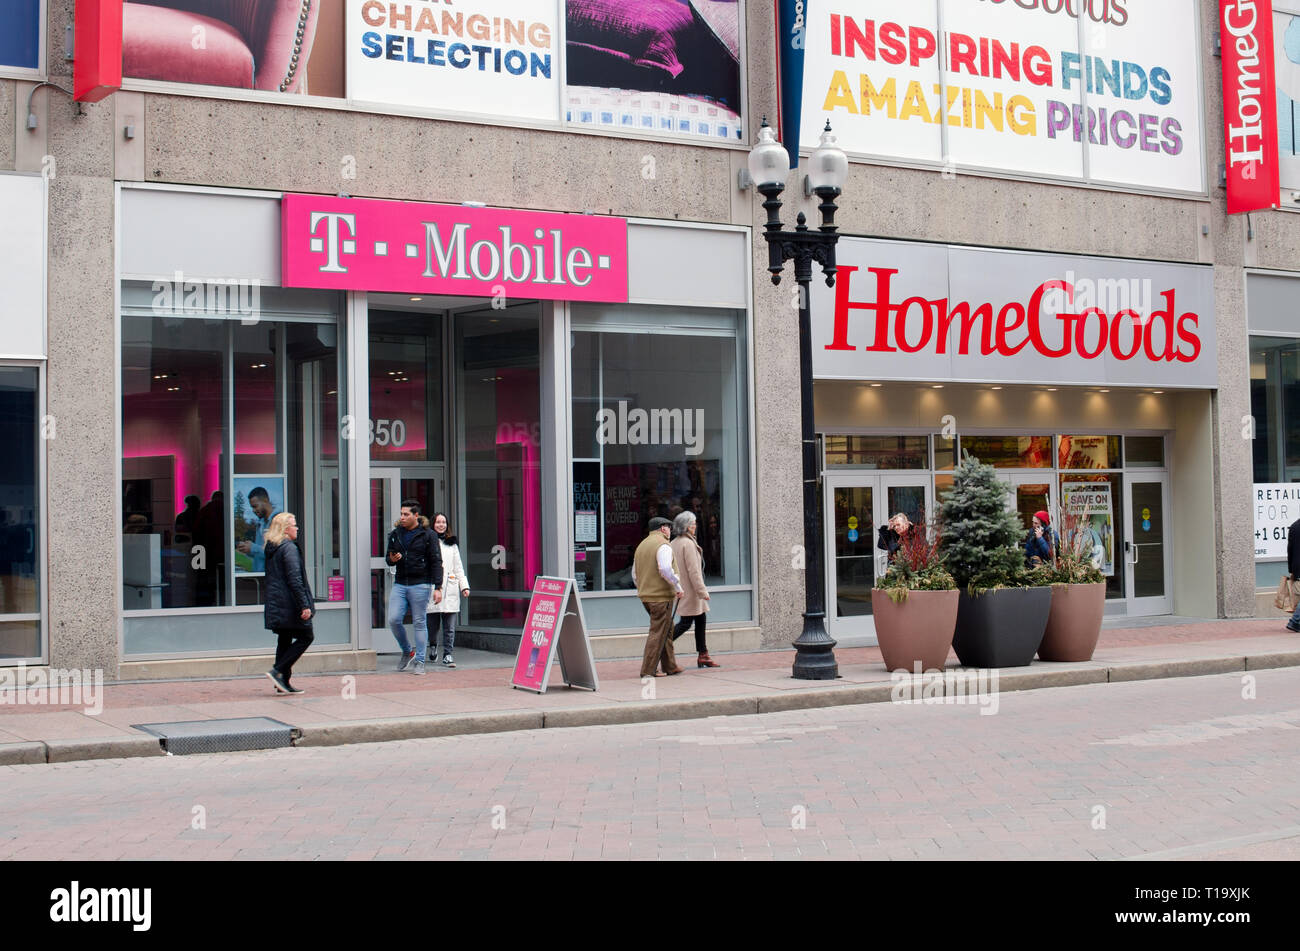 Retail T Mobile und HomeGoods stores at Downtown Crossing in Boston, Massachusetts, USA Stockfoto